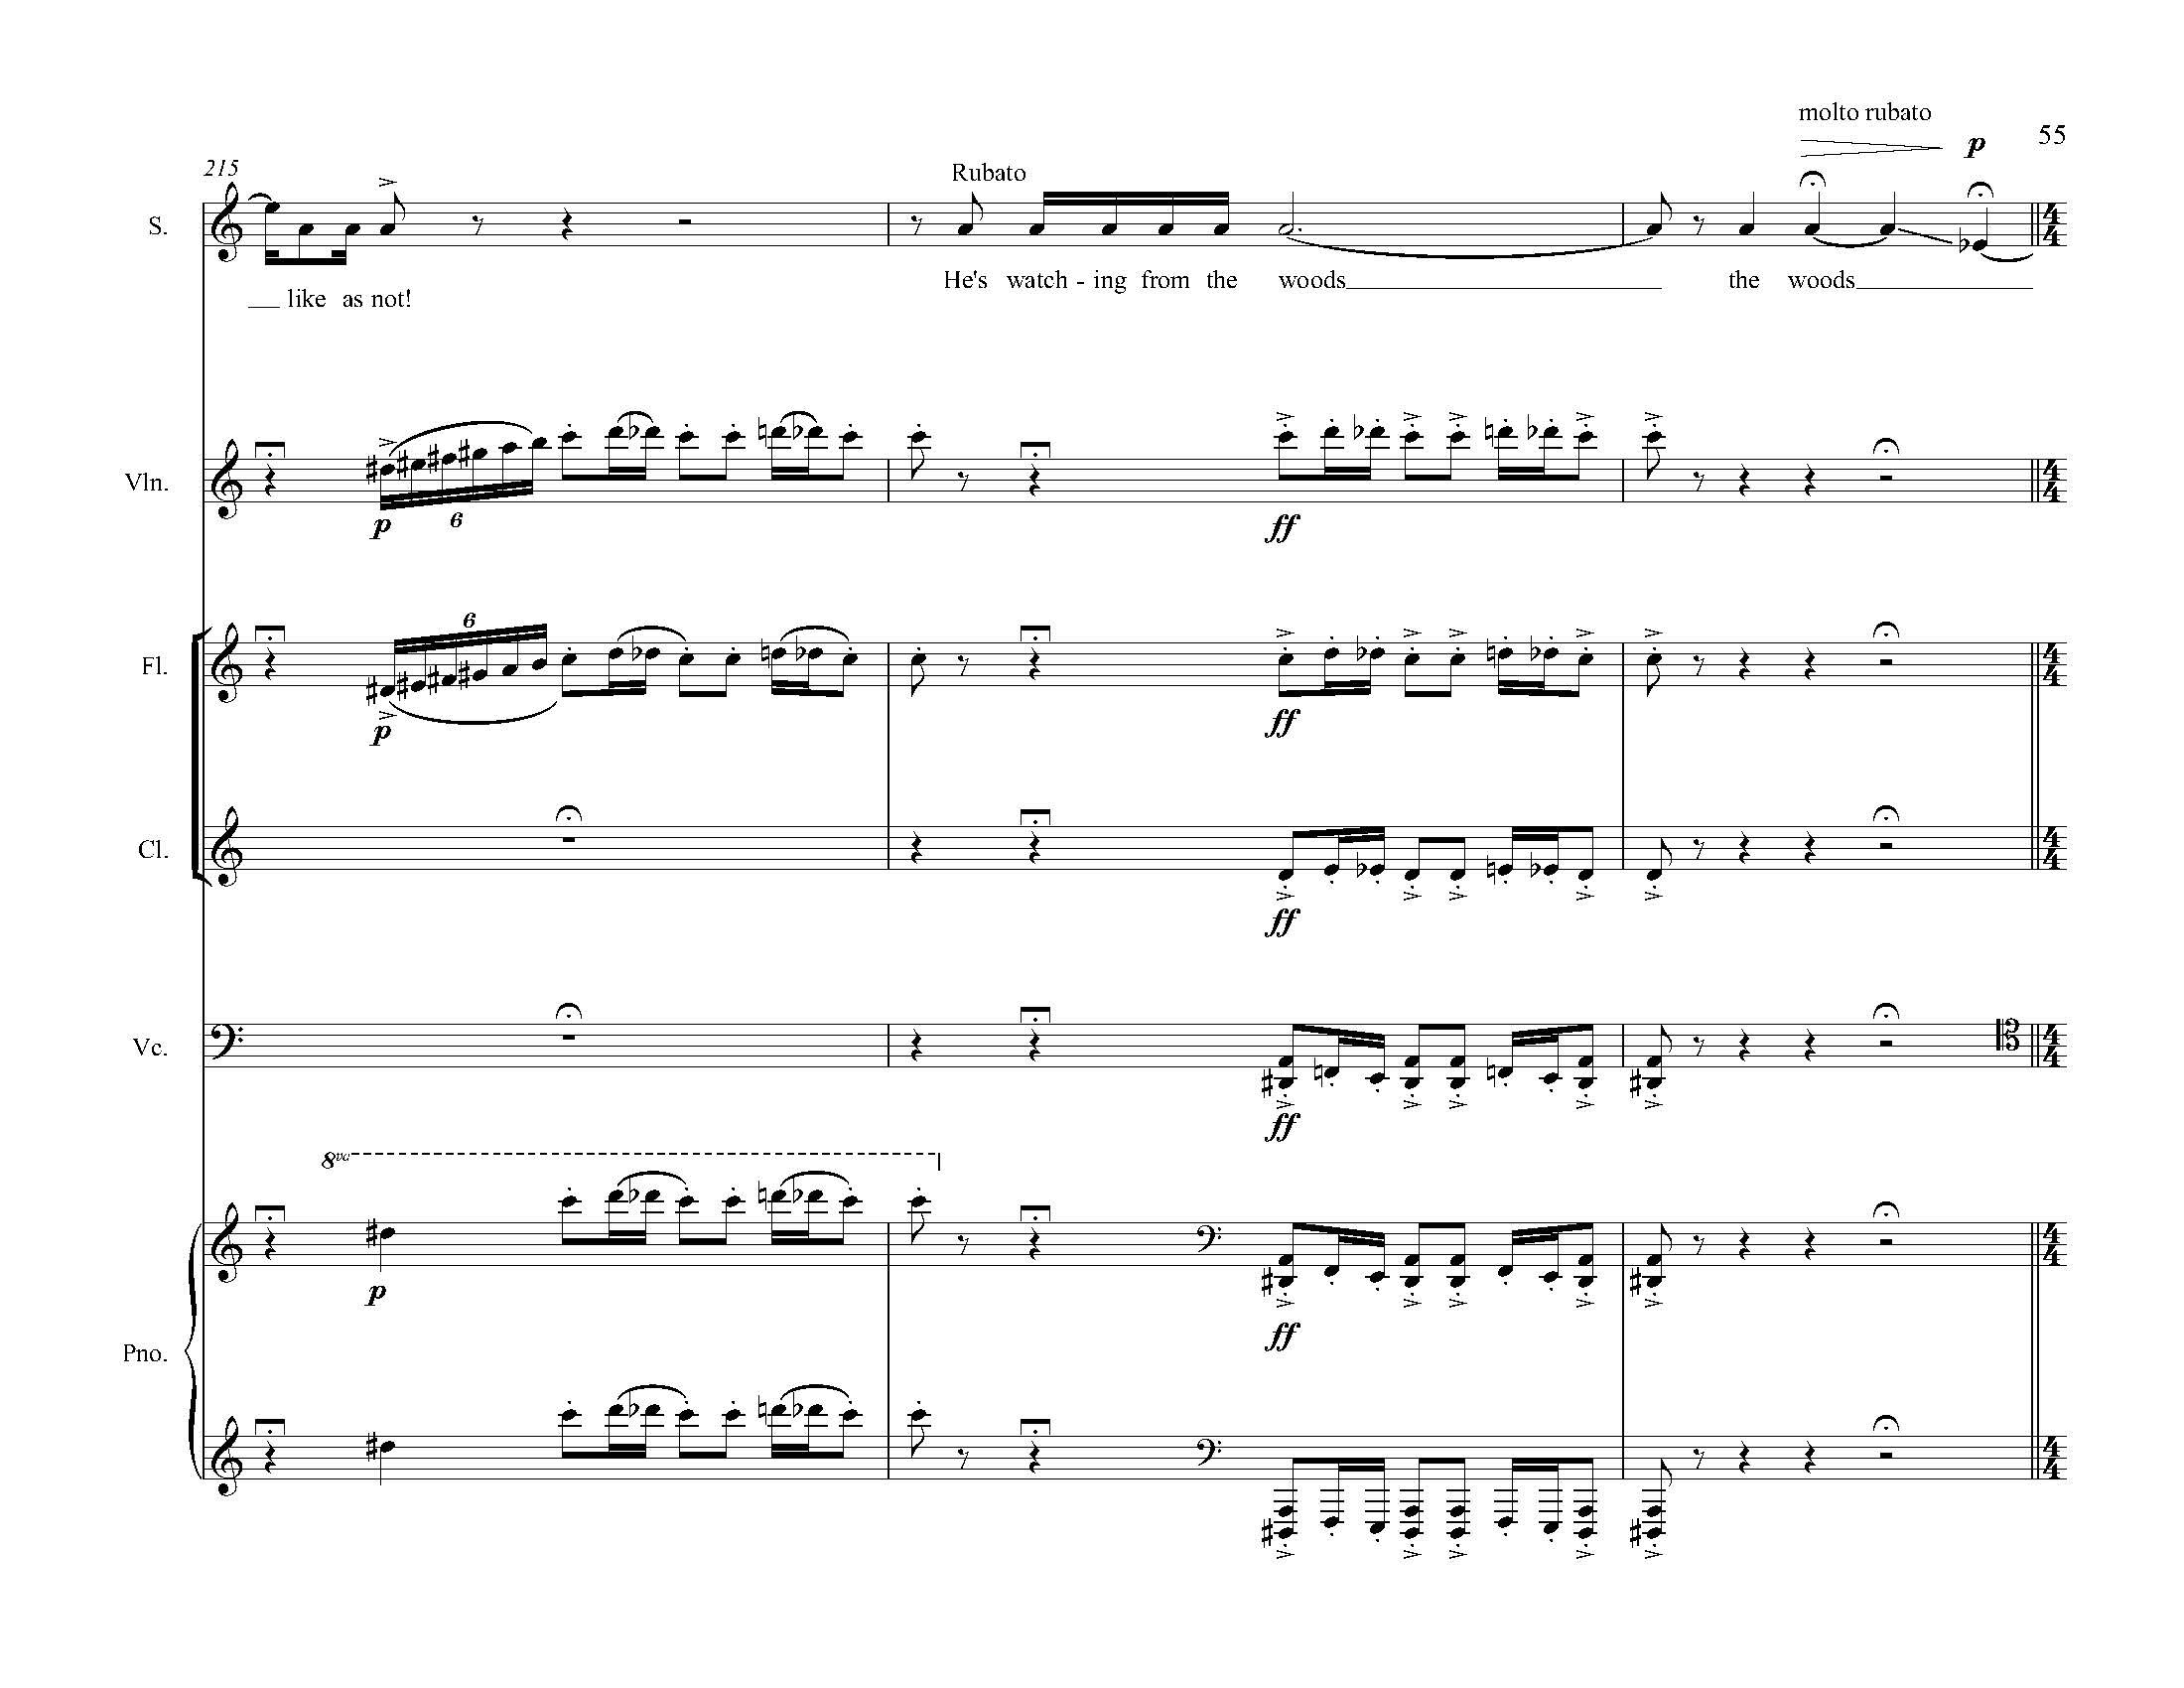 The Hill Wife - Complete Score_Page_063.jpg